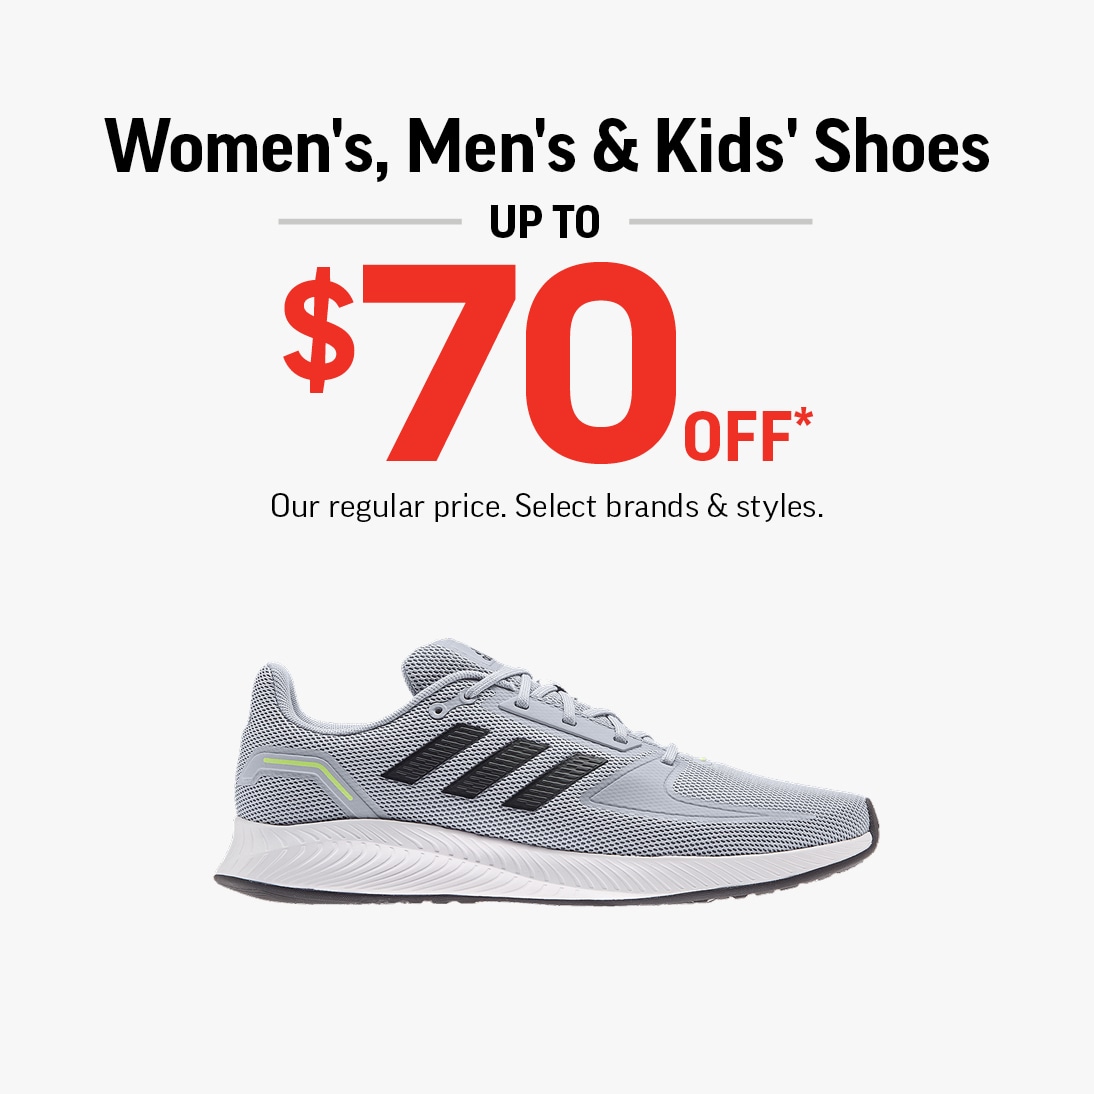 Offer title Shoes Up To $70 Off*!